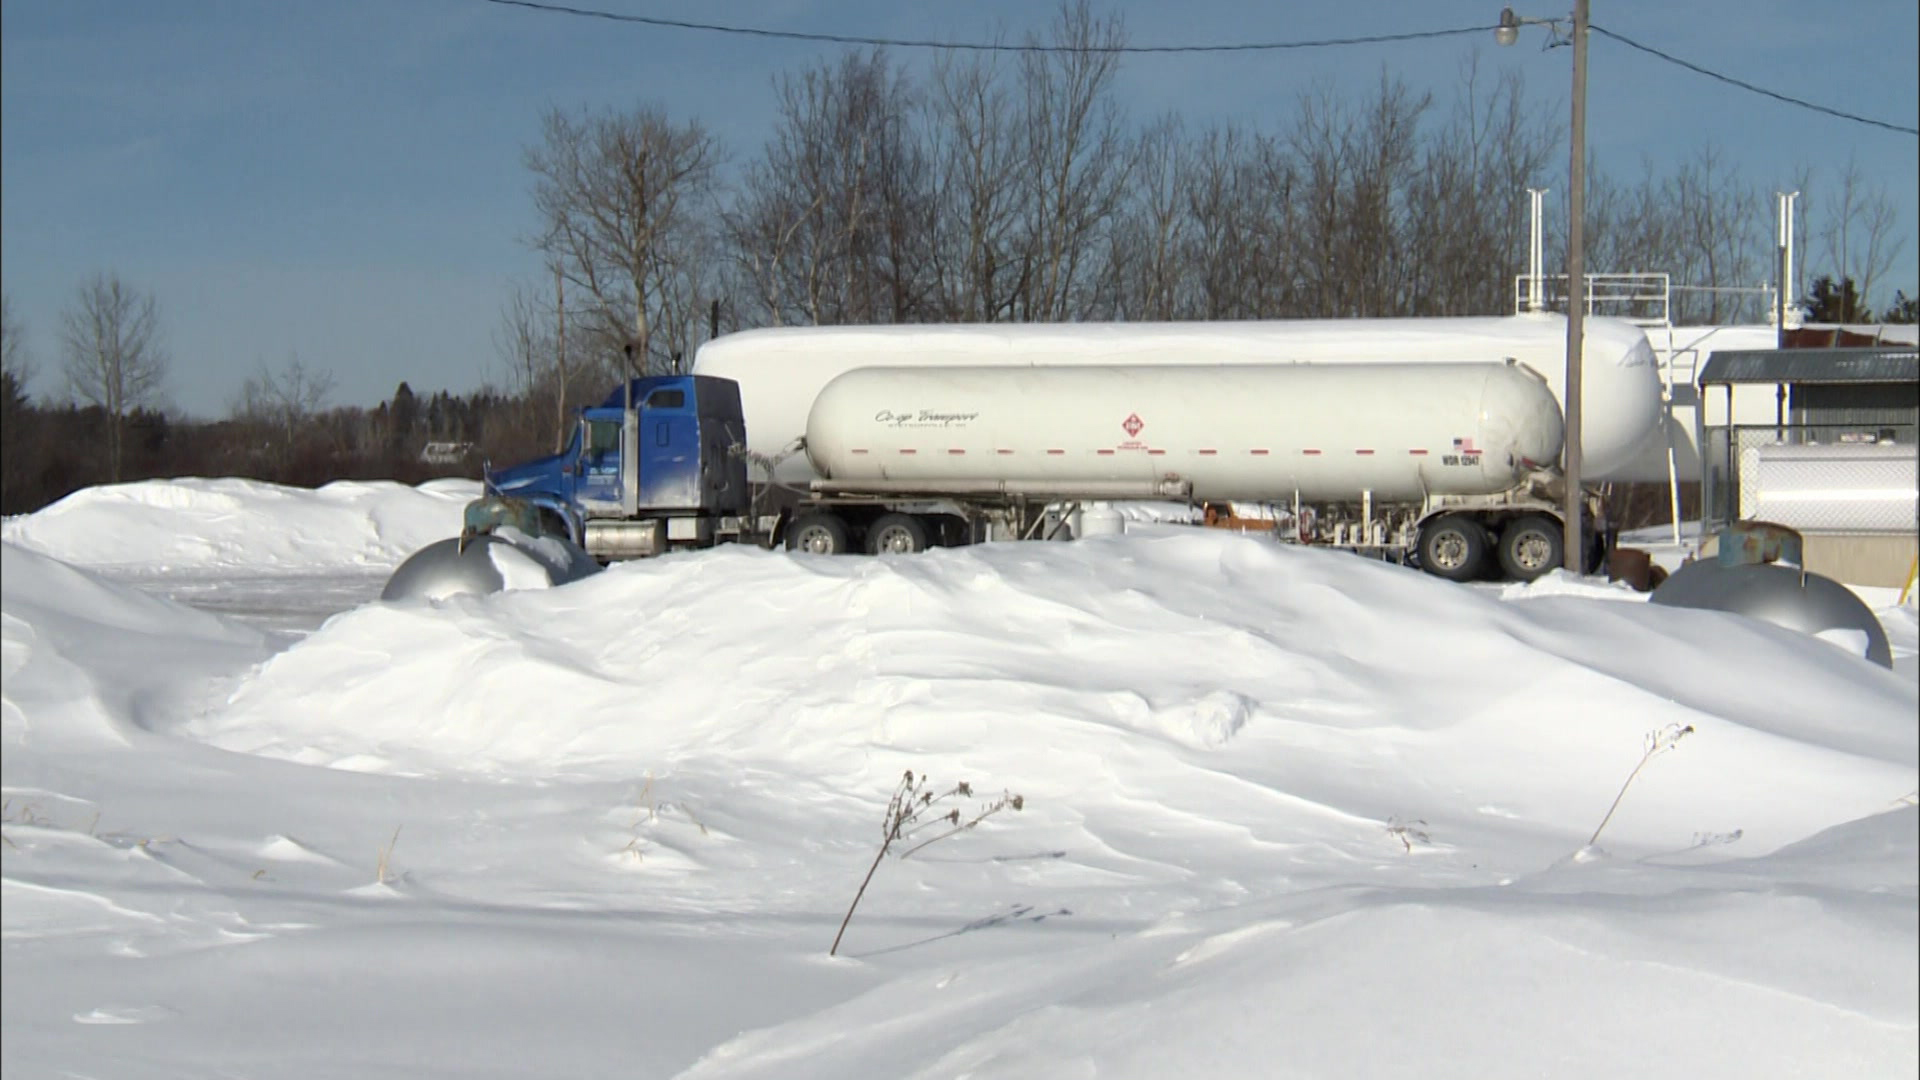 A propane truck sits parked in front of larger propane storage tanks, with smaller propane storage tanks in the foreground mostly covered by snowbanks.